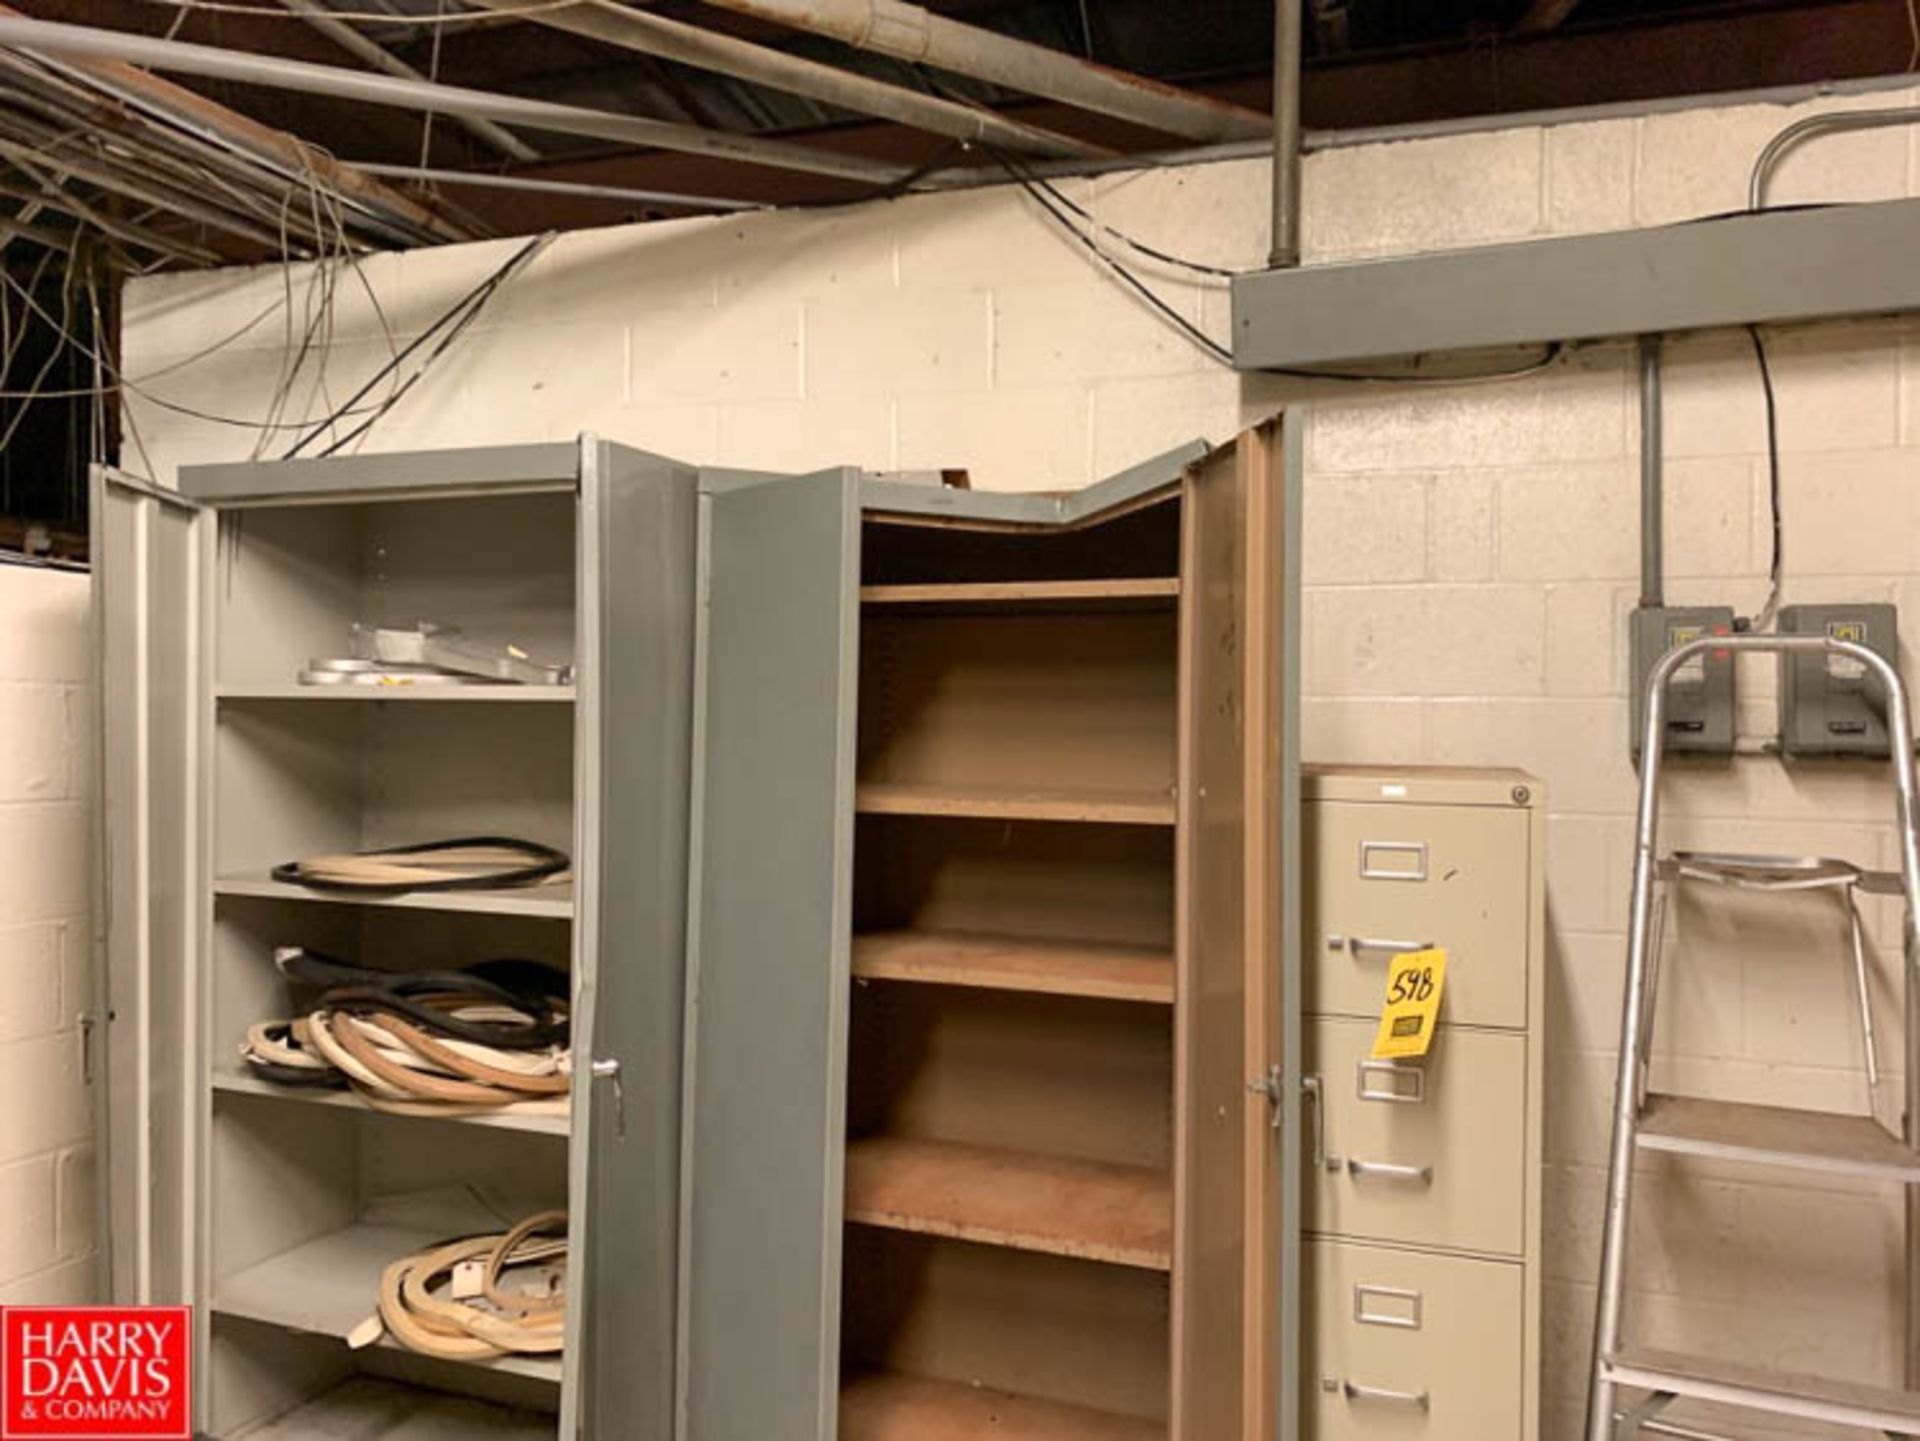 Tank, Gaskets and Cabinets Rigging Fee: $25